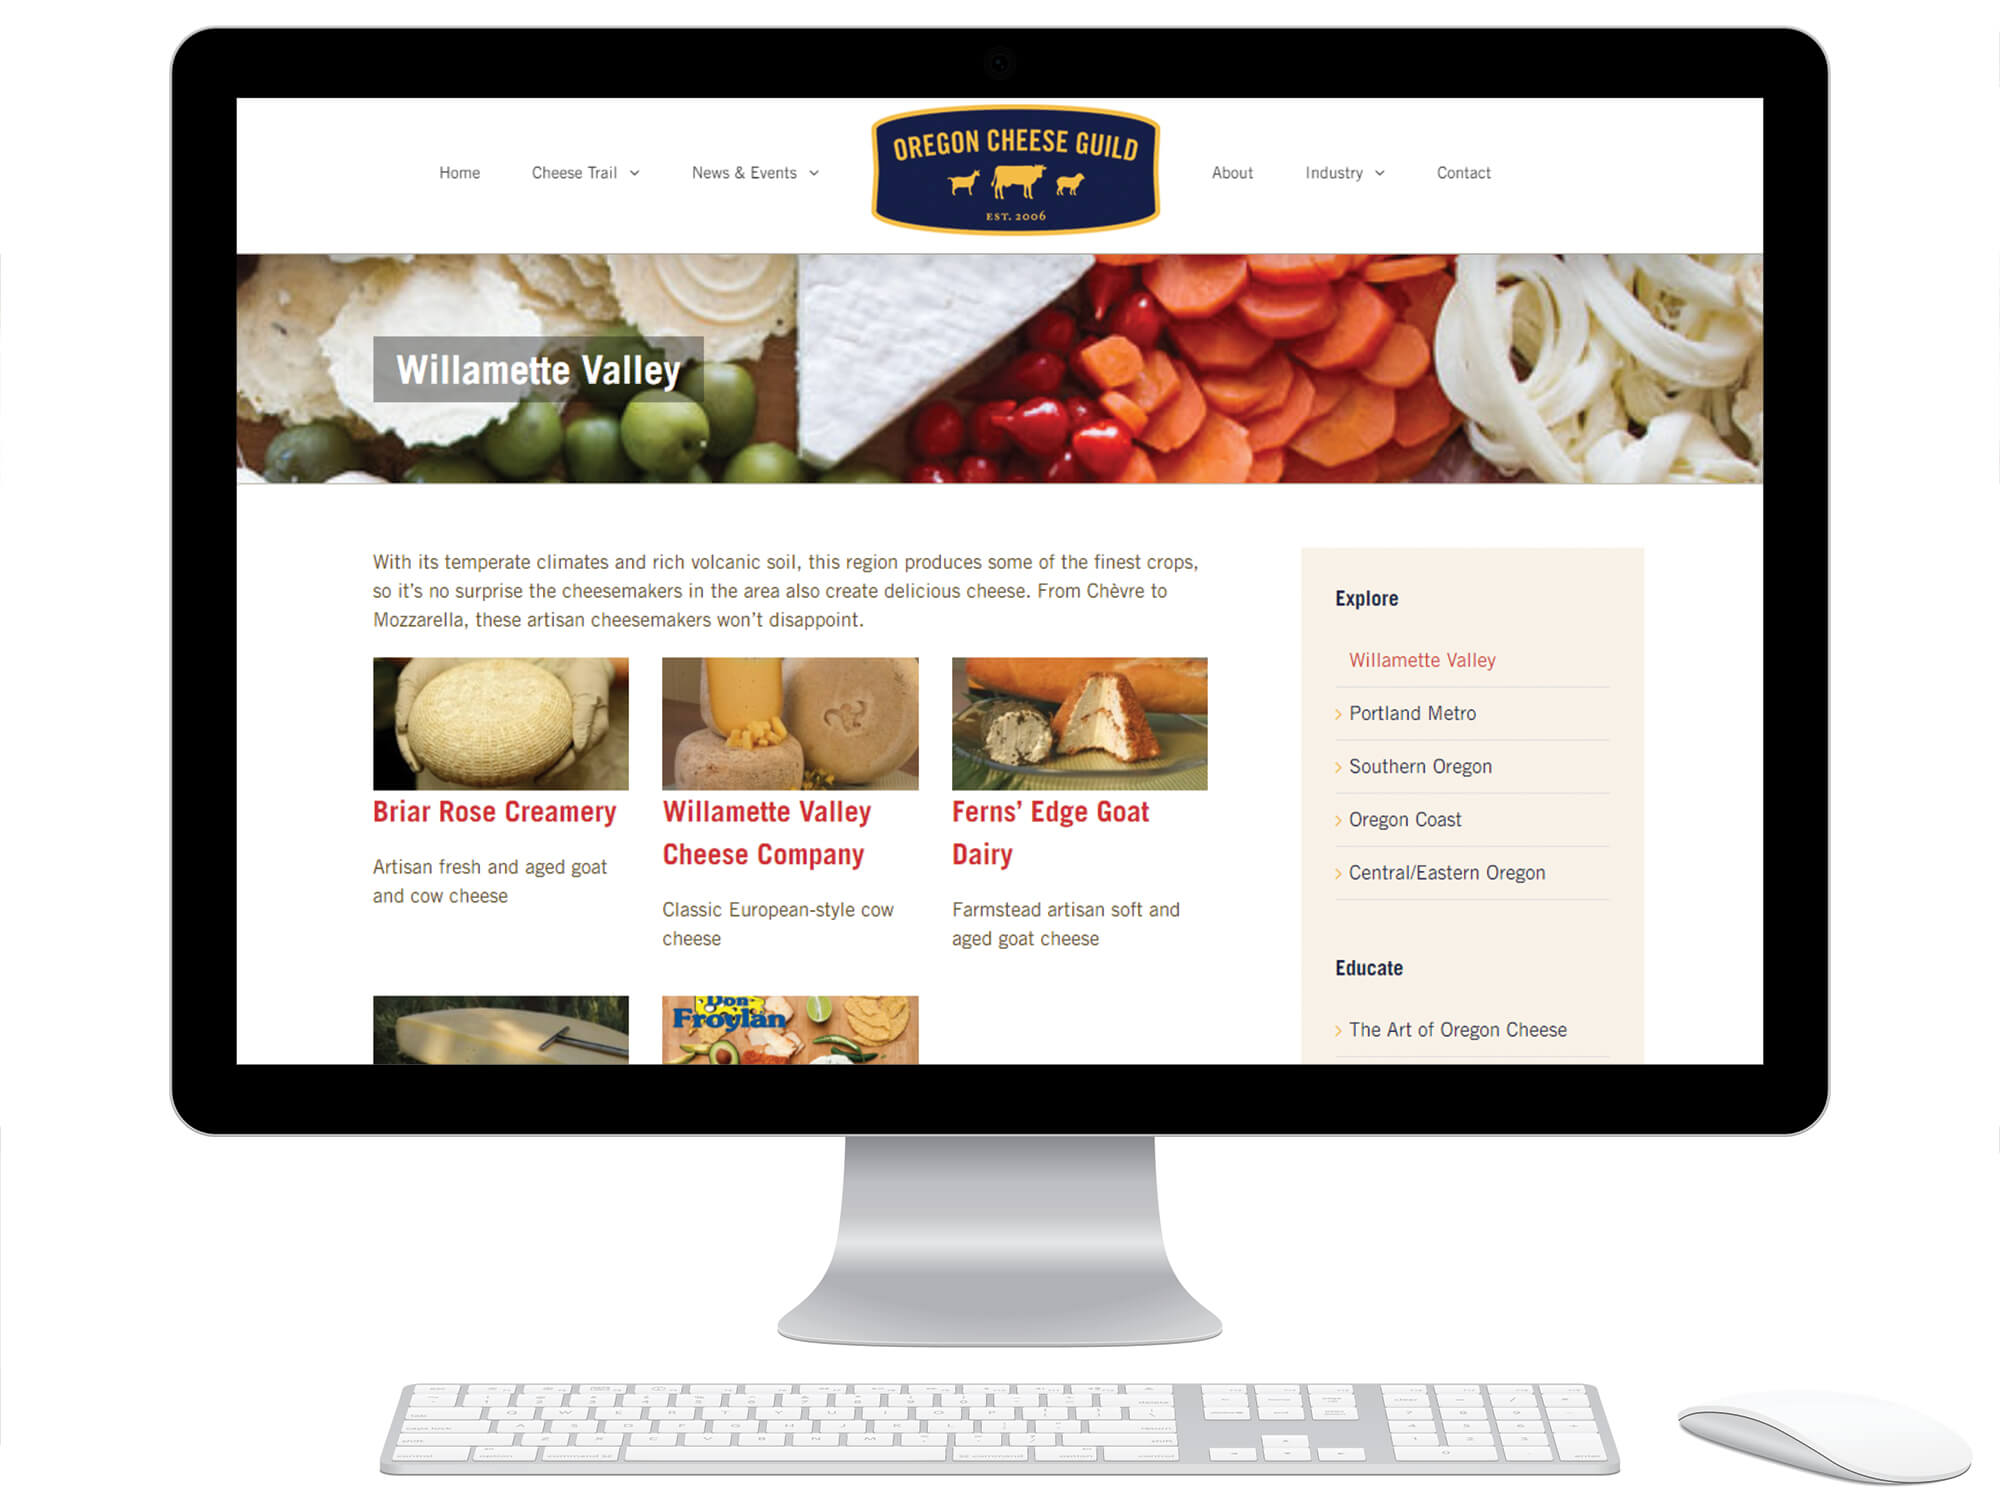 Desktop computer displaying the cheese trail section of the Oregon Cheese Guild website